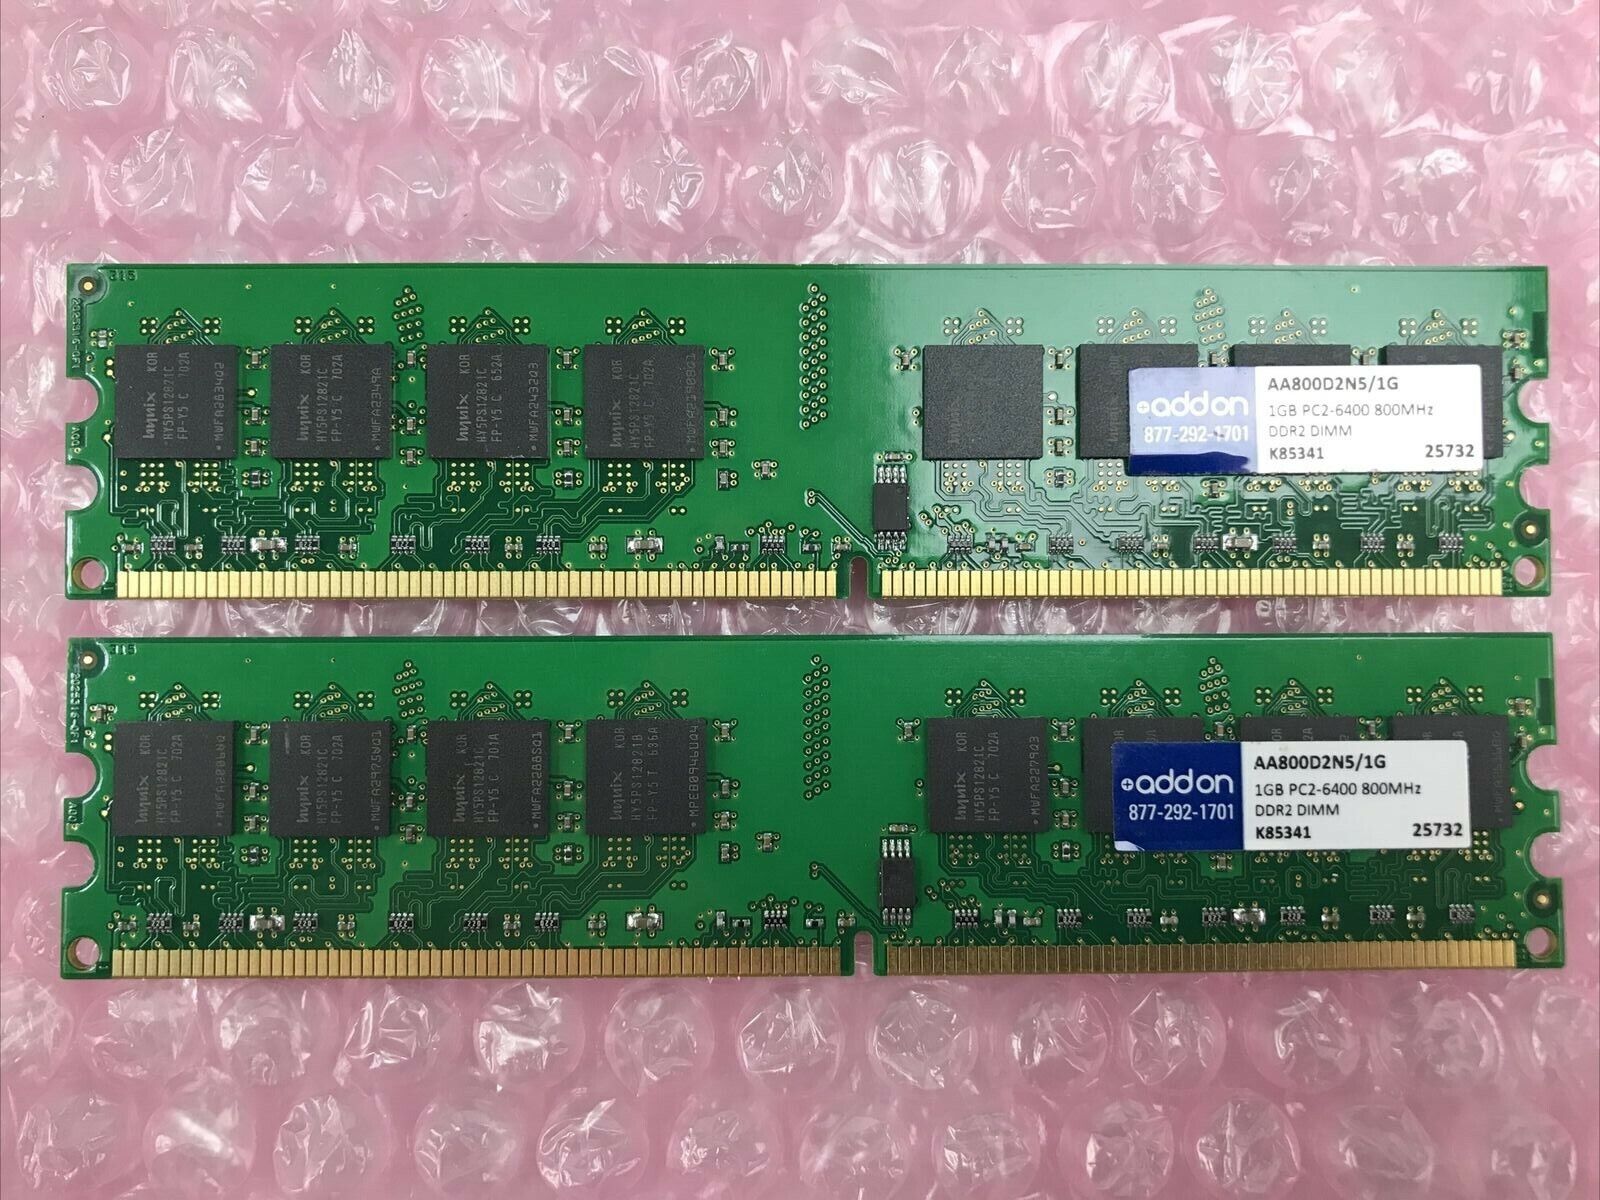 Lot of 2 Addon AA800D2N5/1G - 1GB PC2-6400 800MHz DDR2 DIMM